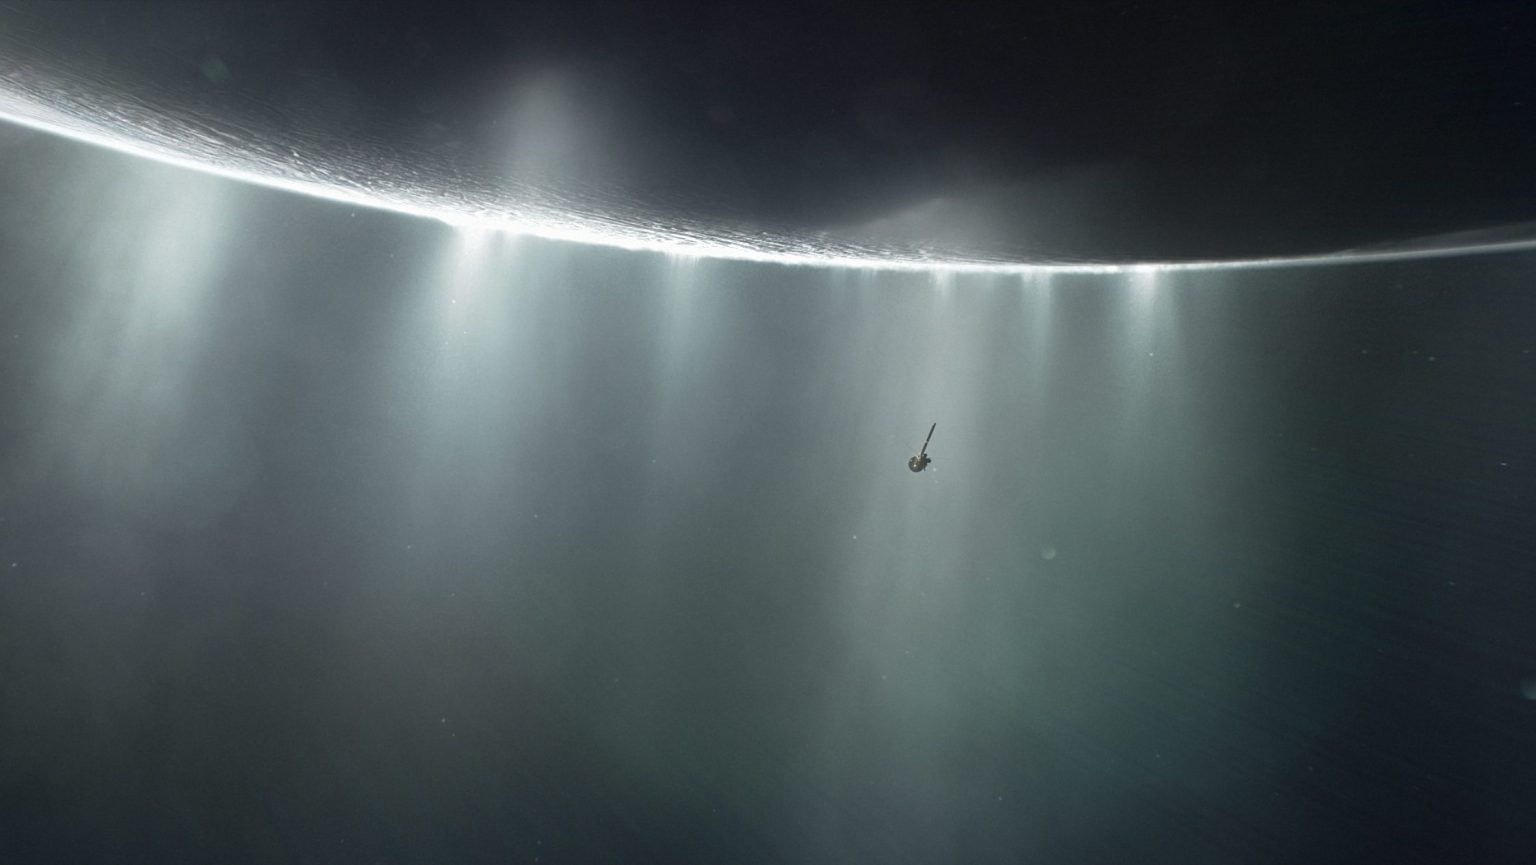 A spacecraft hovers near a bright ring of light in space, surrounded by misty rays and a vast, dark background.